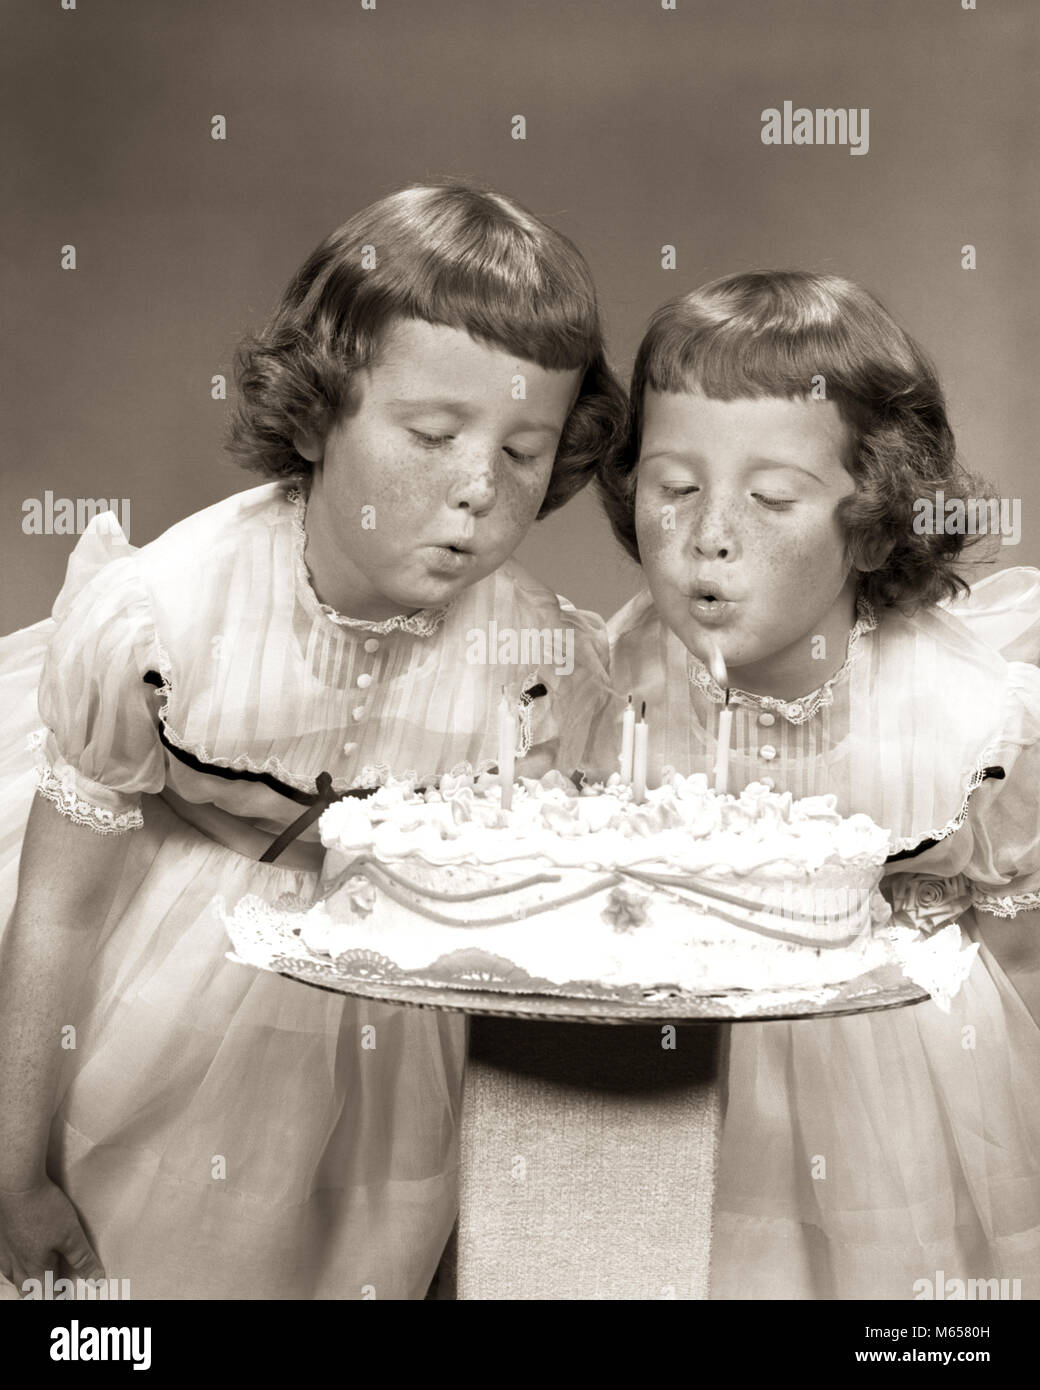 1950s TWIN GIRLS FRECKLES BLOWING OUT CANDLES BIRTHDAY CAKE - j2296 HAR001 HARS INDOORS FRECKLES SIBLINGS SISTERS WISHING NOSTALGIA TOGETHERNESS 3-4 YEARS MATCHING SAME 5-6 YEARS NOURISH GROWTH SIBLING CONNECTION COOPERATION NOURISHMENT WISH LOOK-ALIKE DRESS ALIKE DUPLICATE JUVENILES LOOK ALIKE B&W BANGS BLACK AND WHITE CAUCASIAN ETHNICITY CLONE FRECKLE-FACED IDENTITY OLD FASHIONED Stock Photo